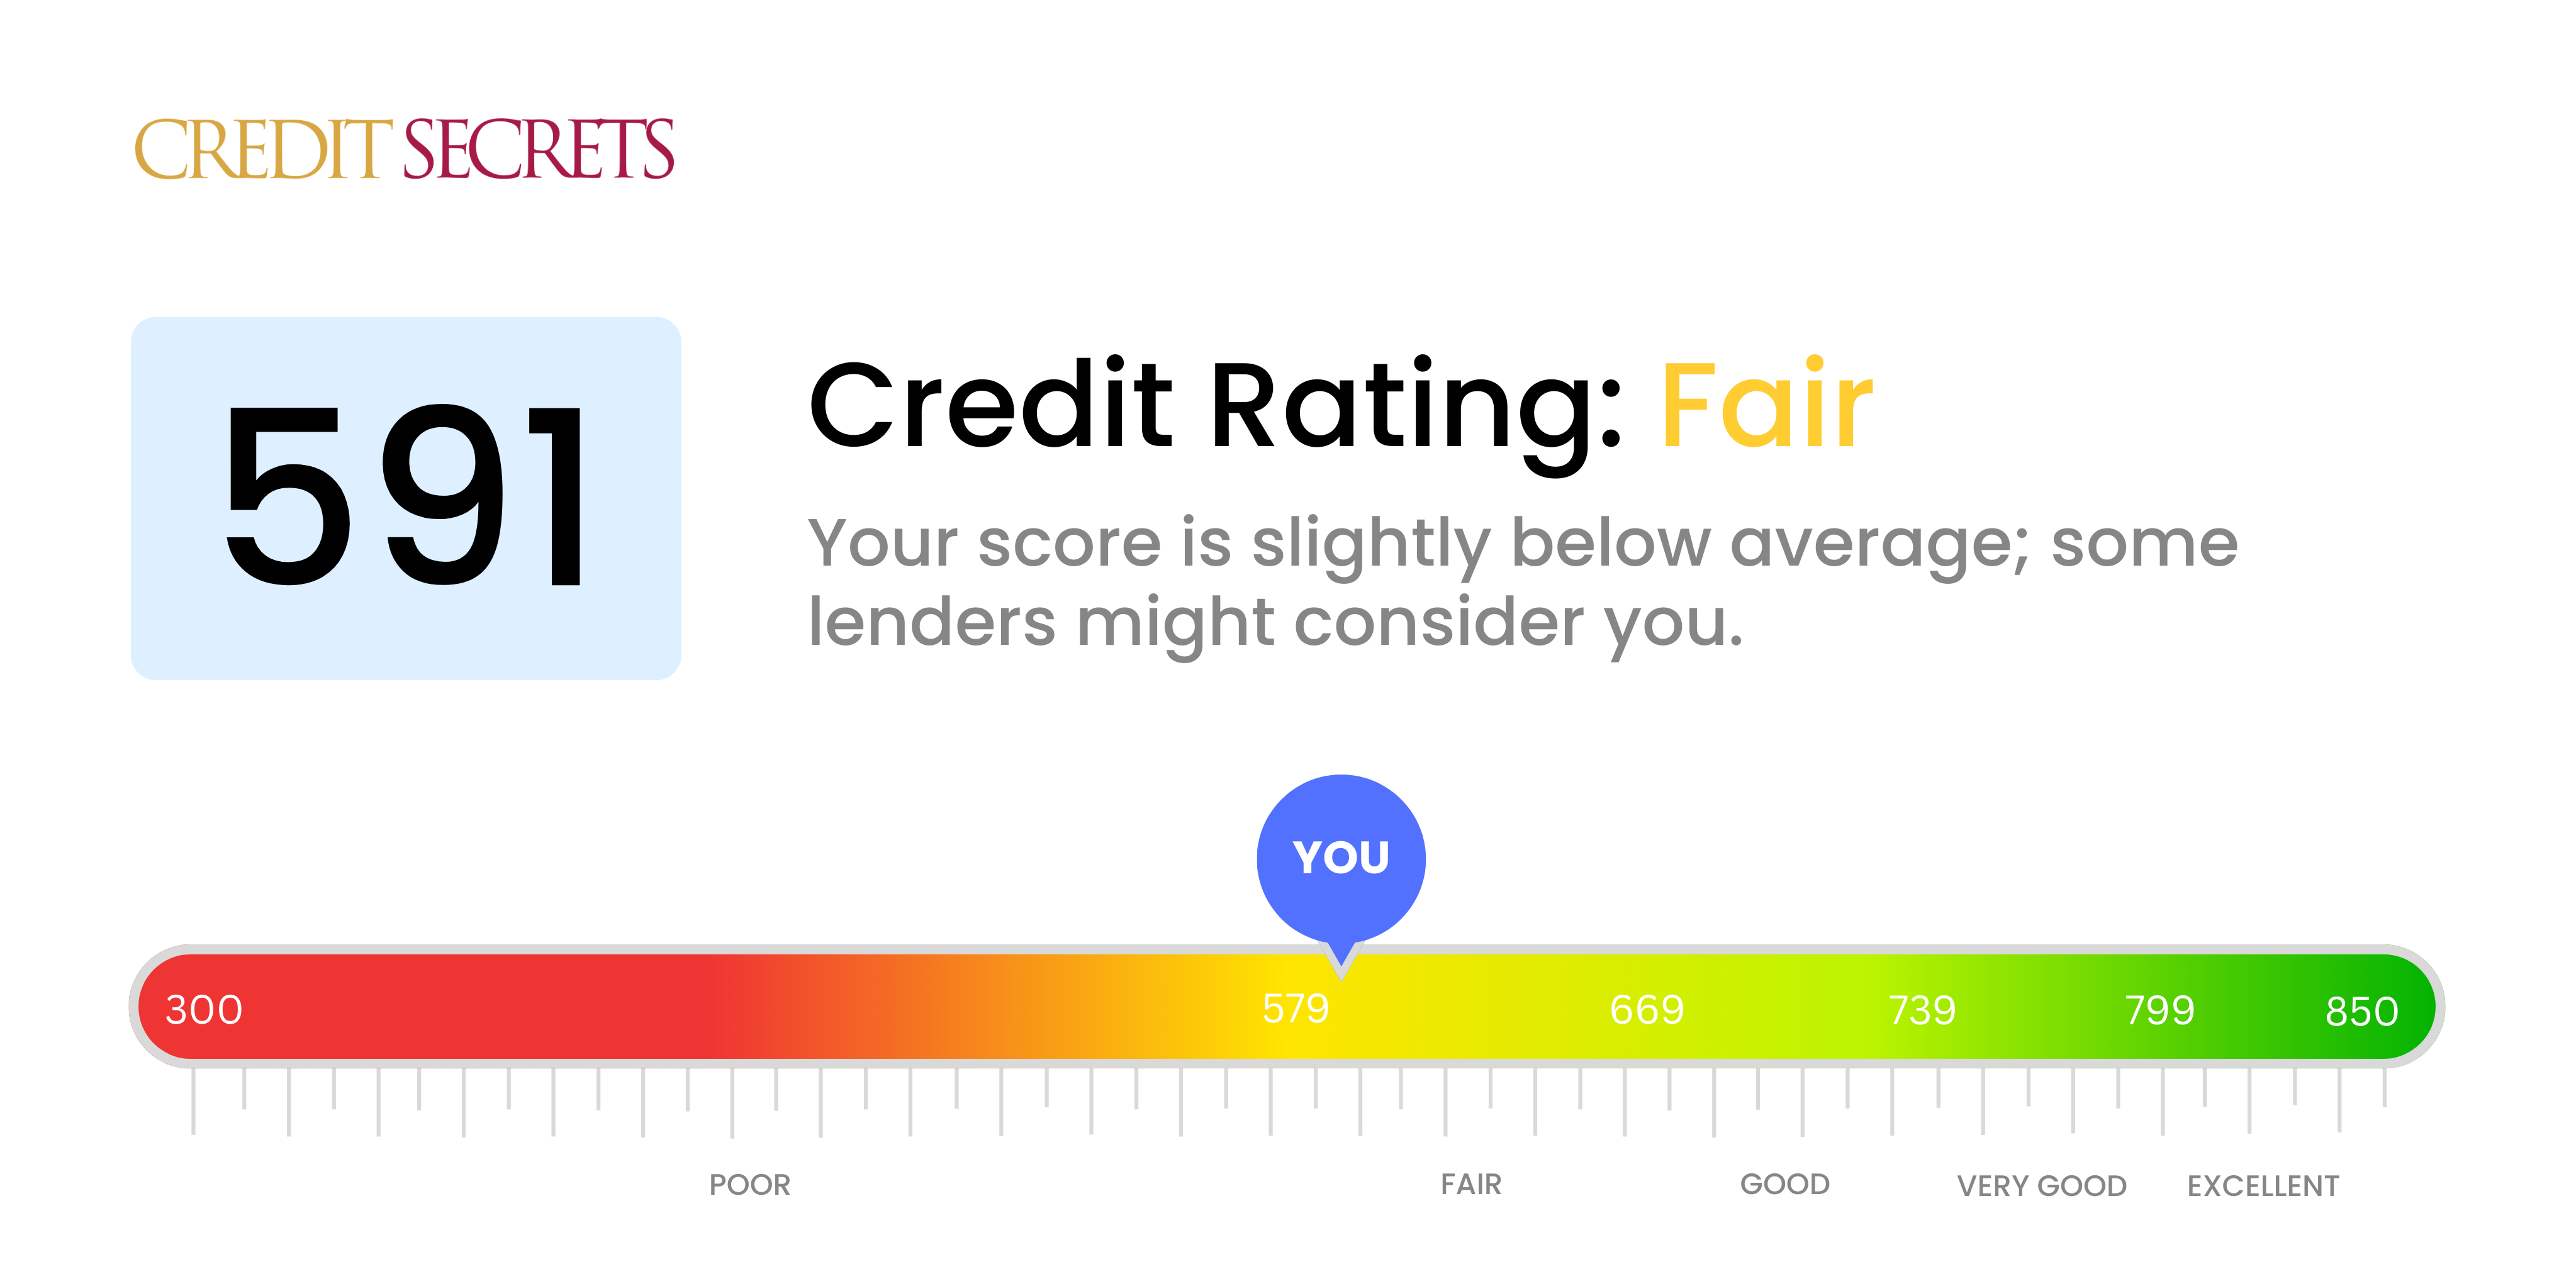 Is 591 a good credit score?